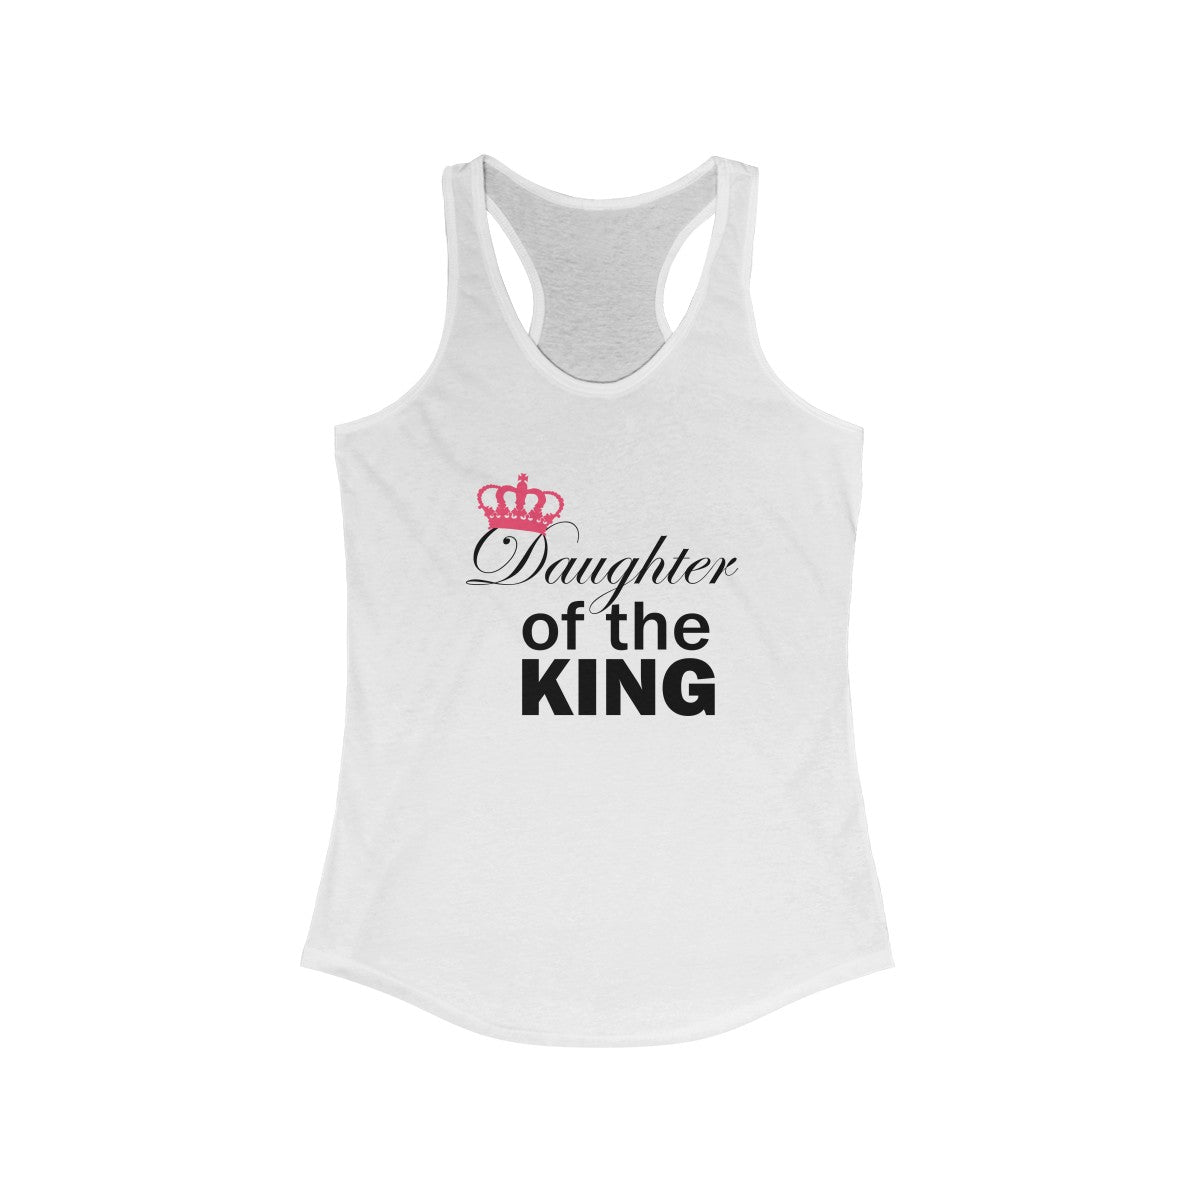 Daughter of the King - Women's Ideal Racerback Tank